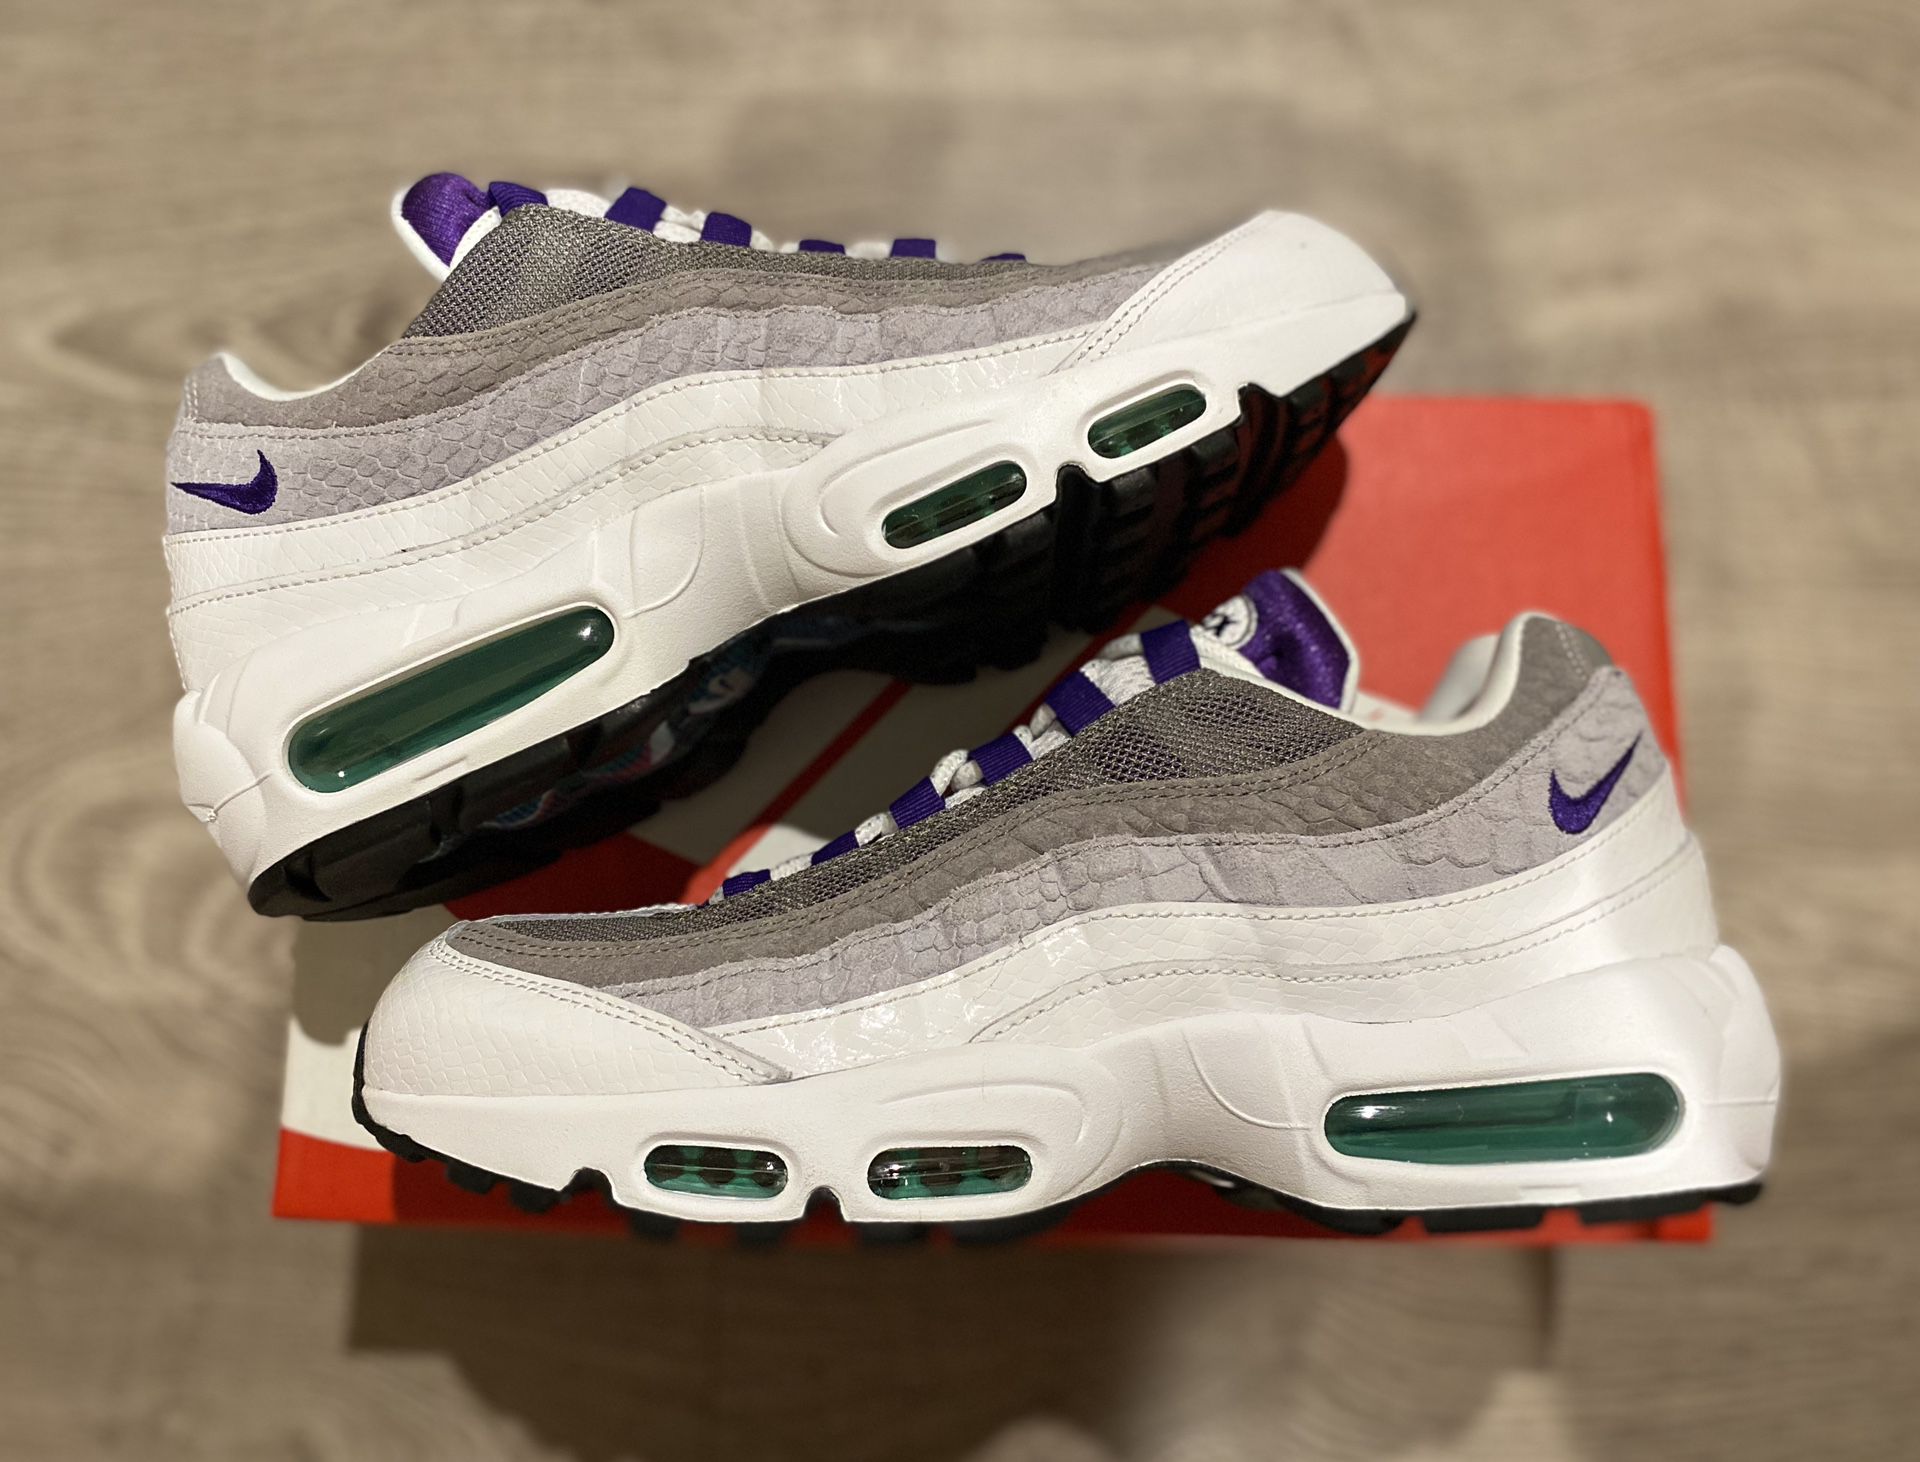 Air Max 95 Grape Snakeskin Size 8.5 and 9 Men’s